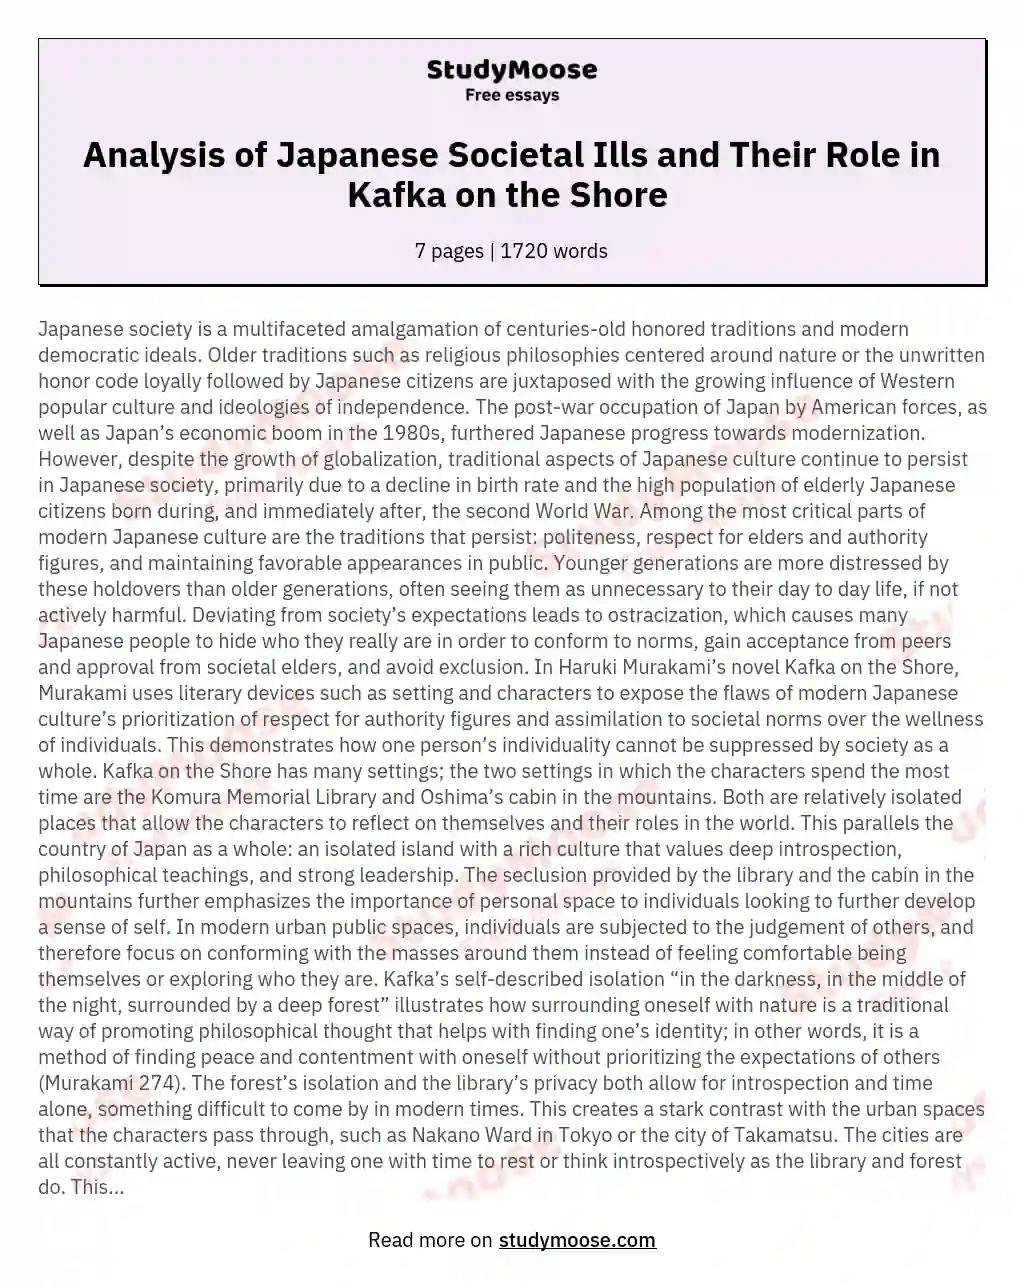 Analysis of Japanese Societal Ills and Their Role in Kafka on the Shore  essay